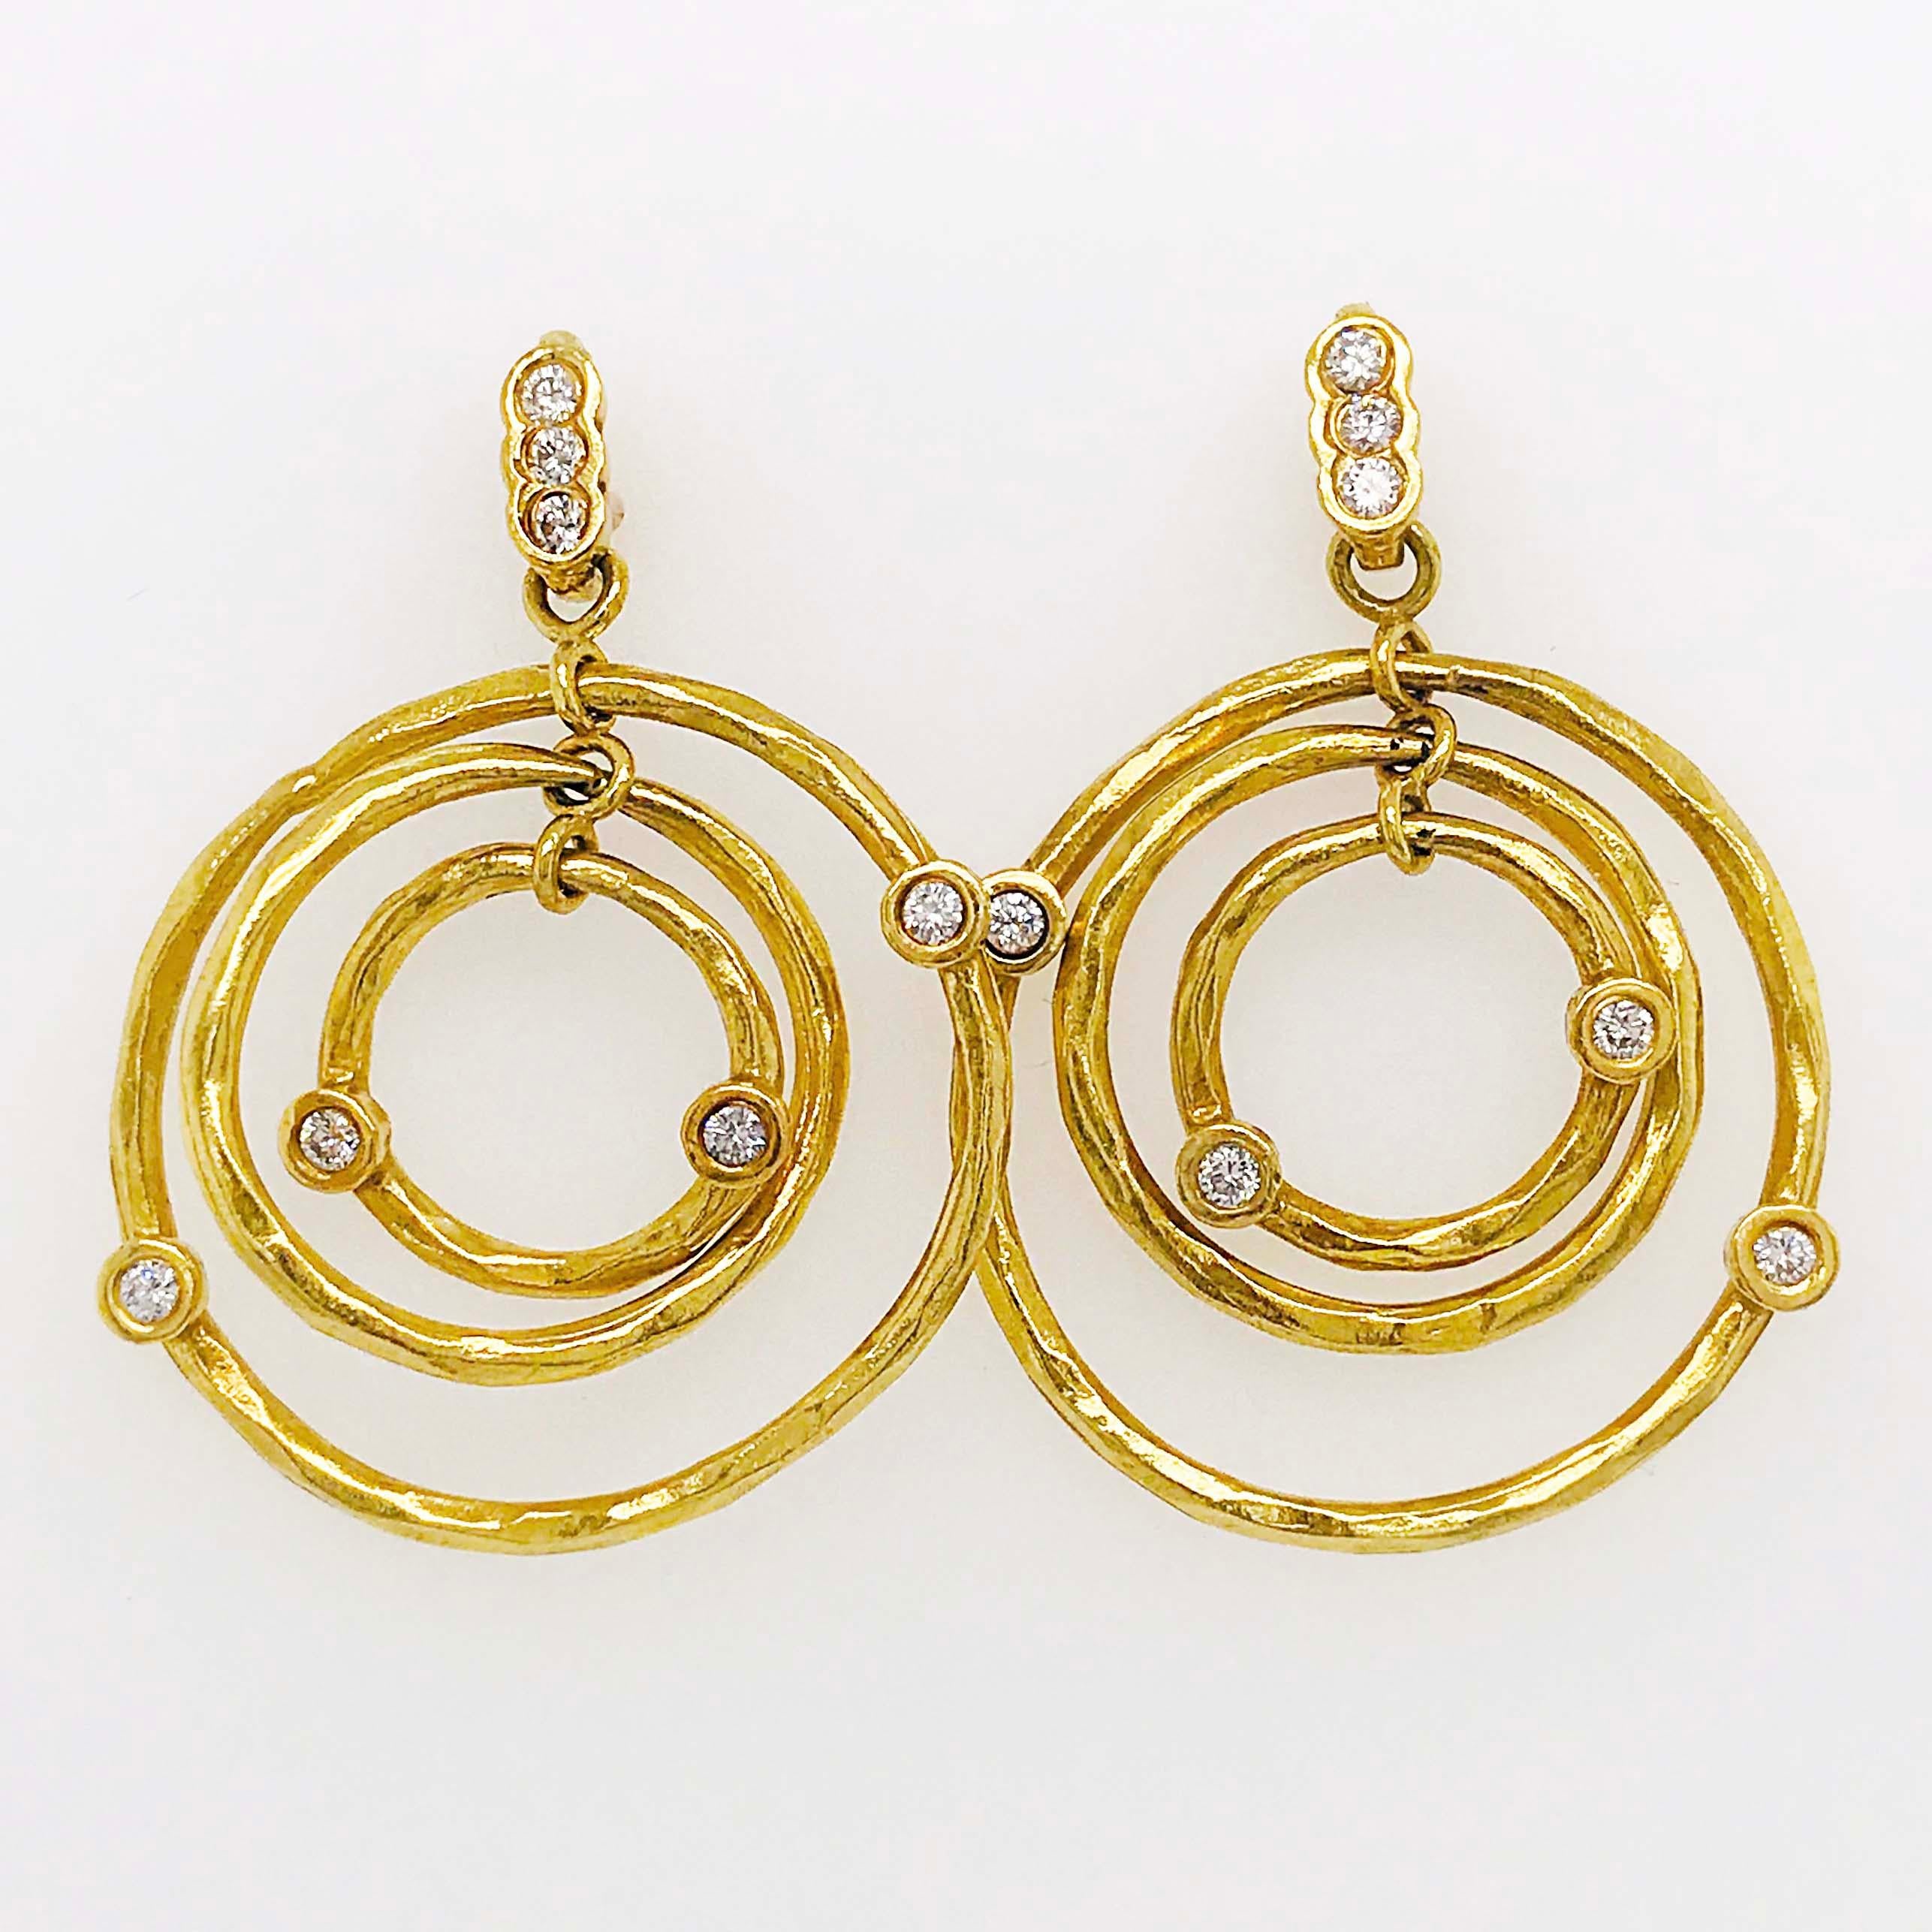 How gorgeous are these custom diamond circle dangle earrings? These earrings were hand fabricated and crafted carefully and beautifully. With three open circles descending in size that appear to be floating together in a pleasing way. The open